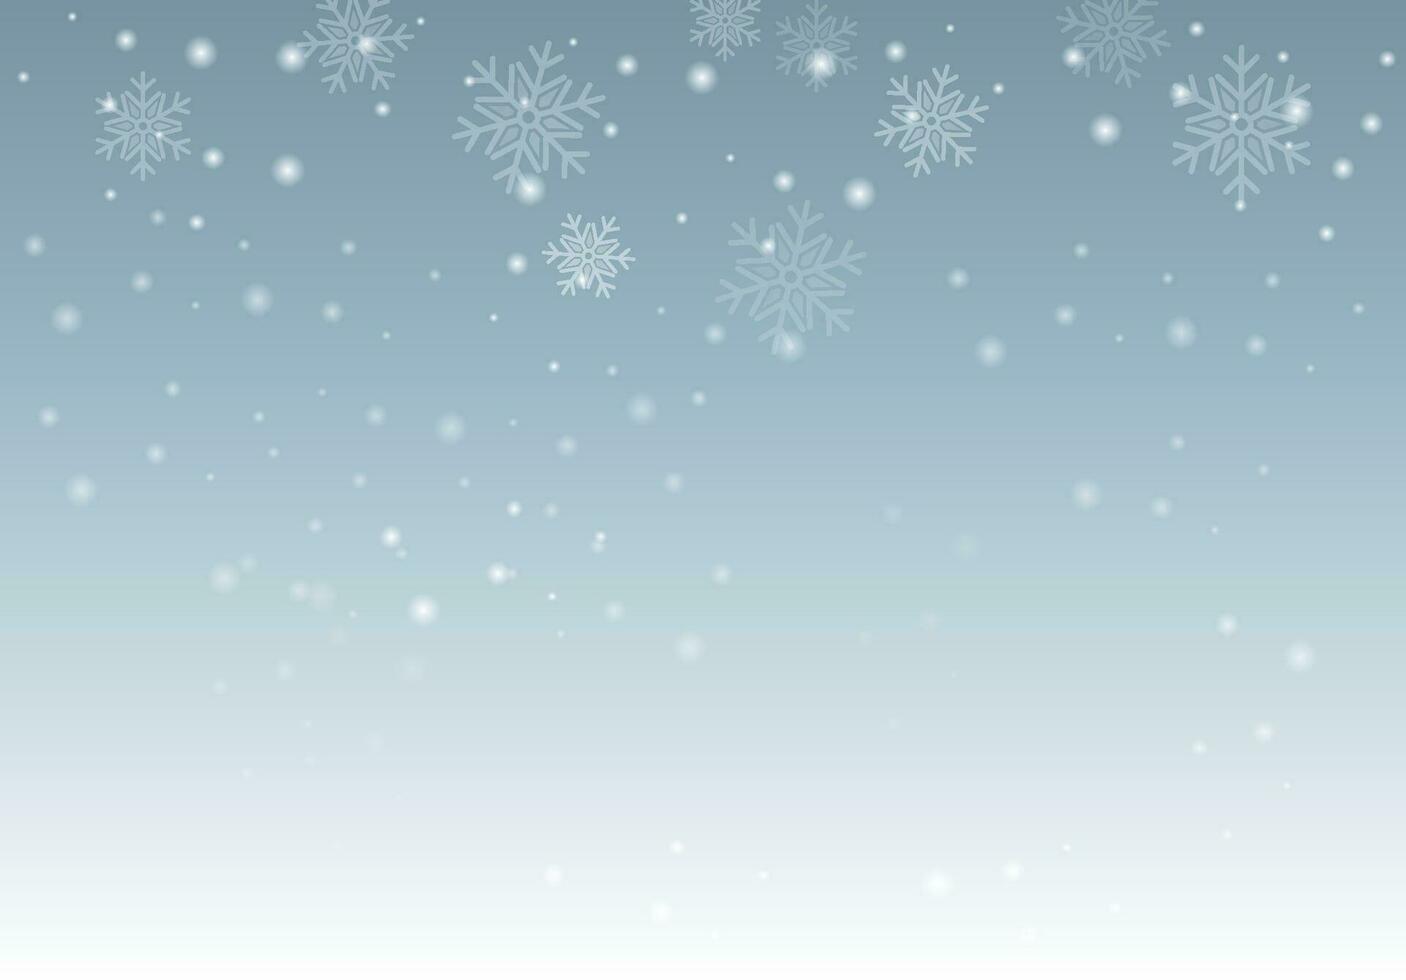 Merry Christmas and Happy New Year background for Greeting cards Vector illustration